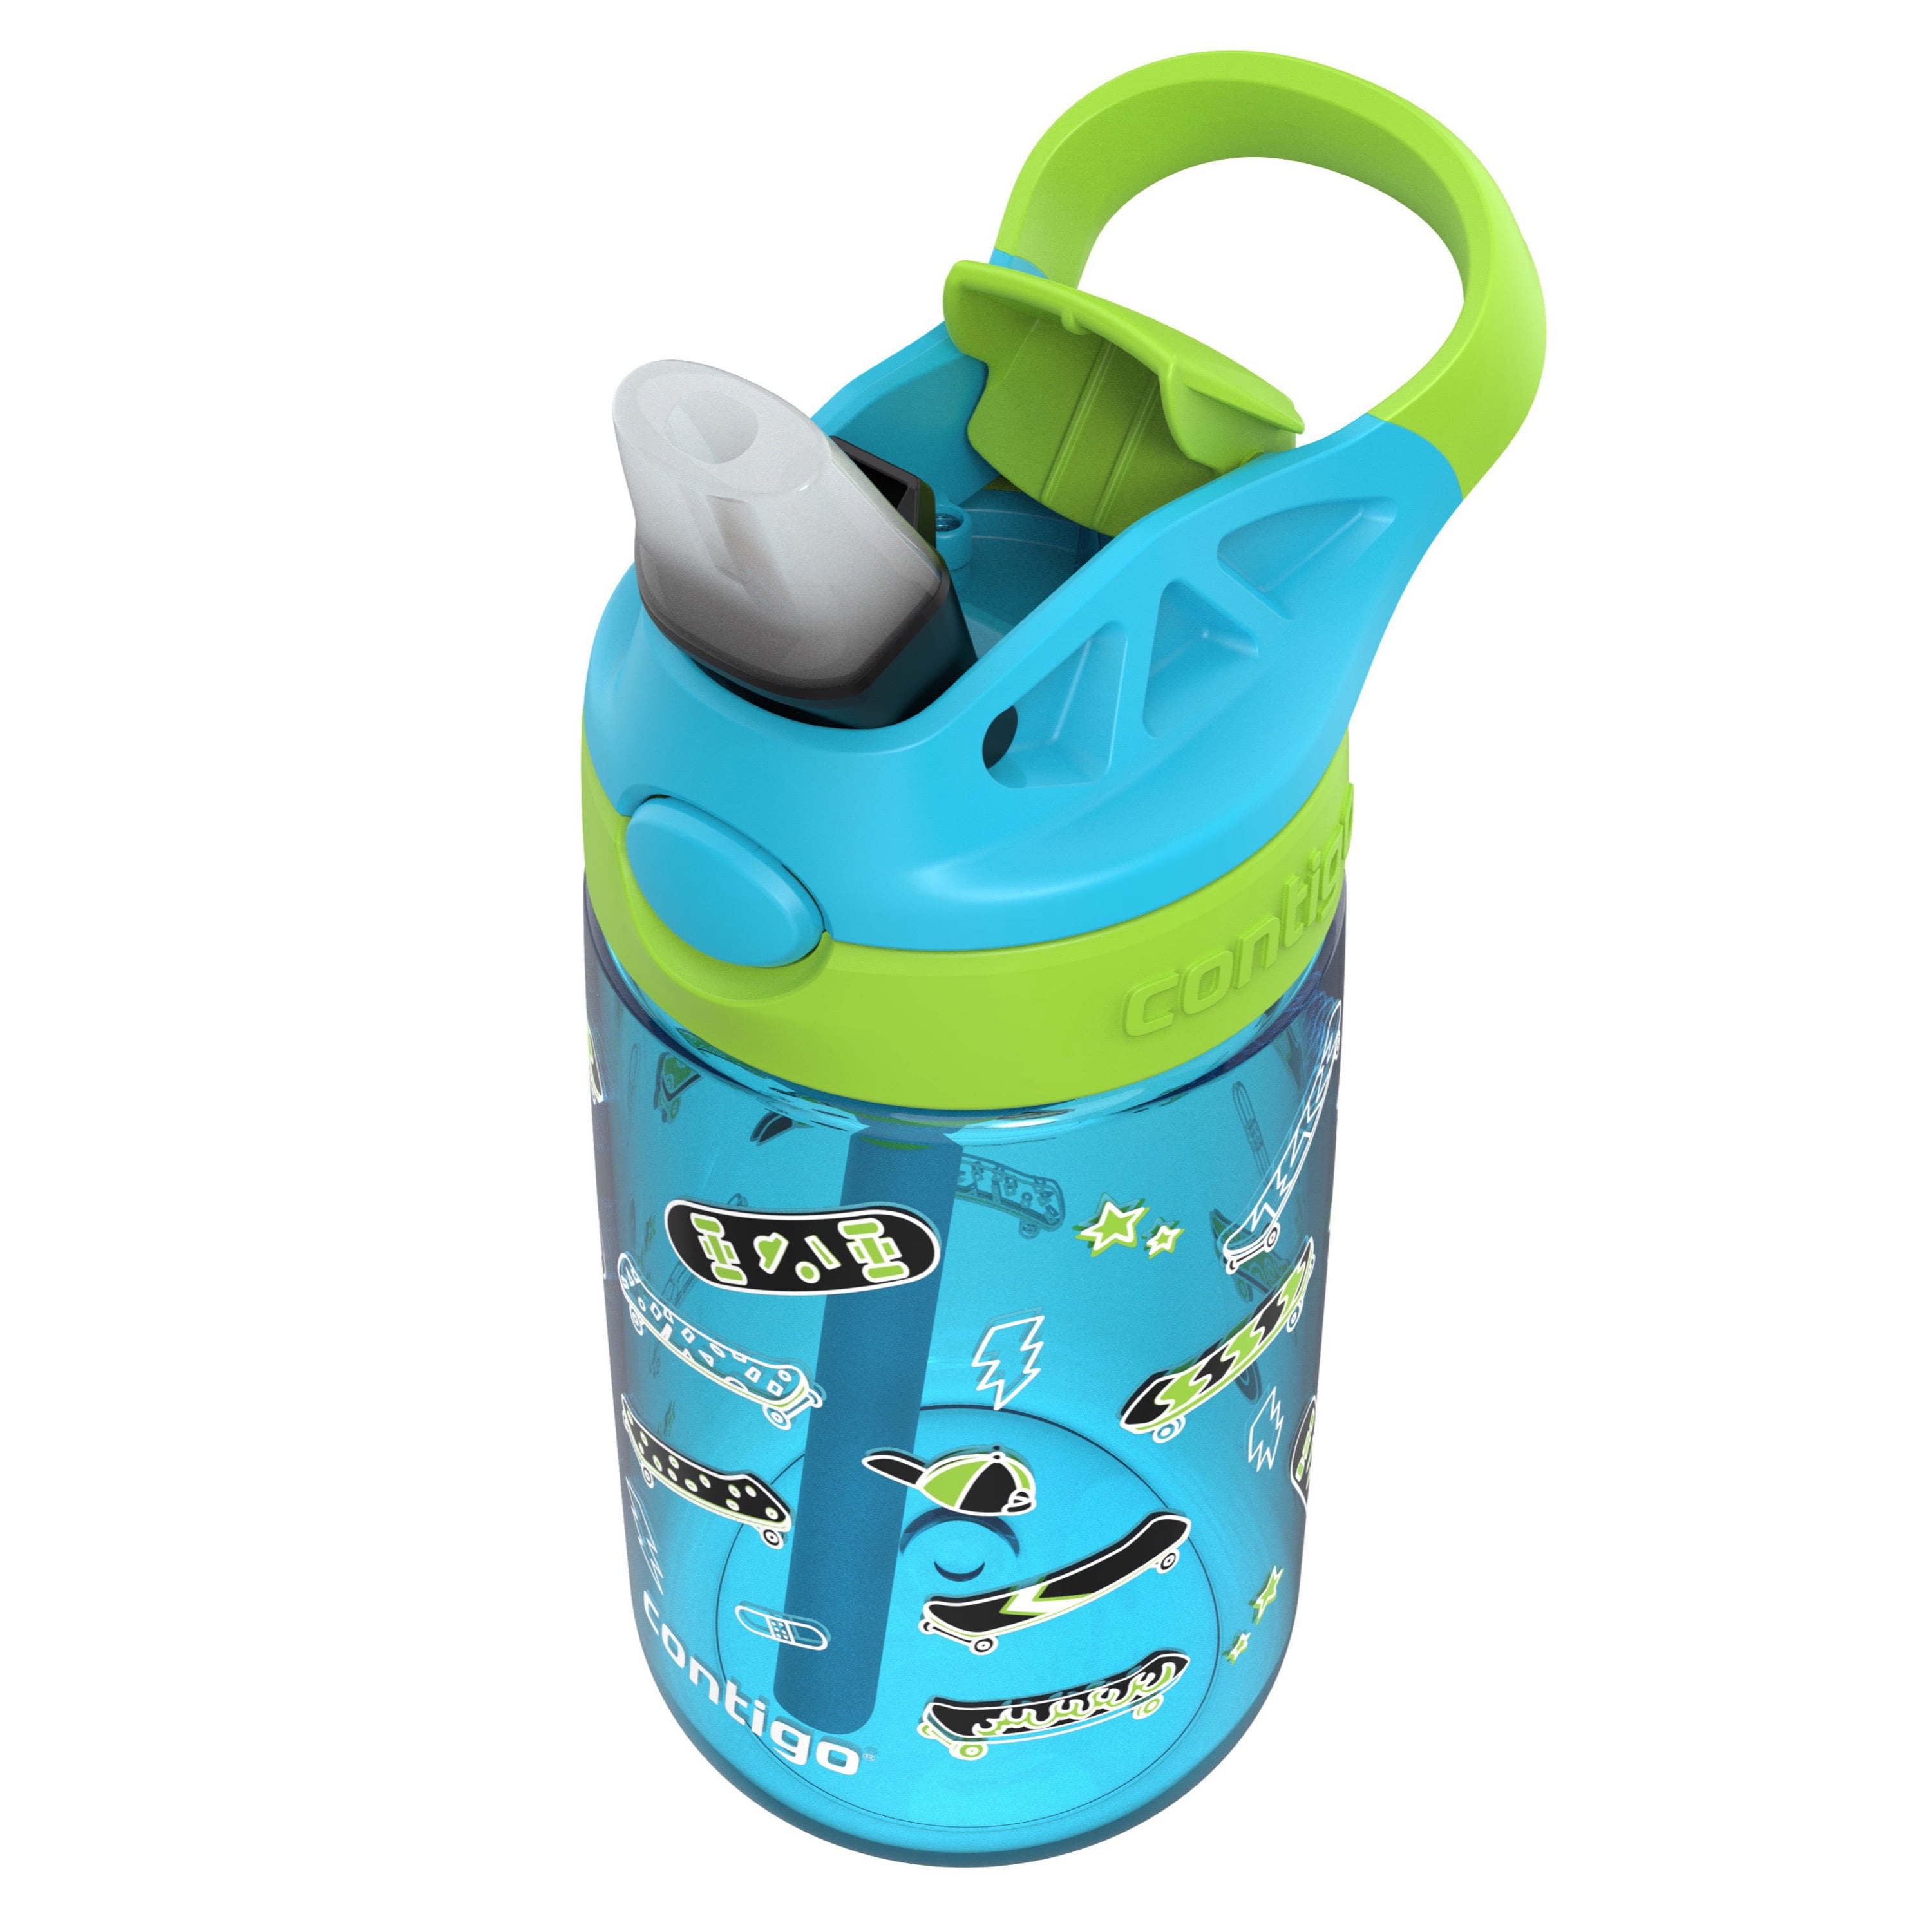 Contigo Aubrey Kids Cleanable Water Bottle with Silicone Straw and